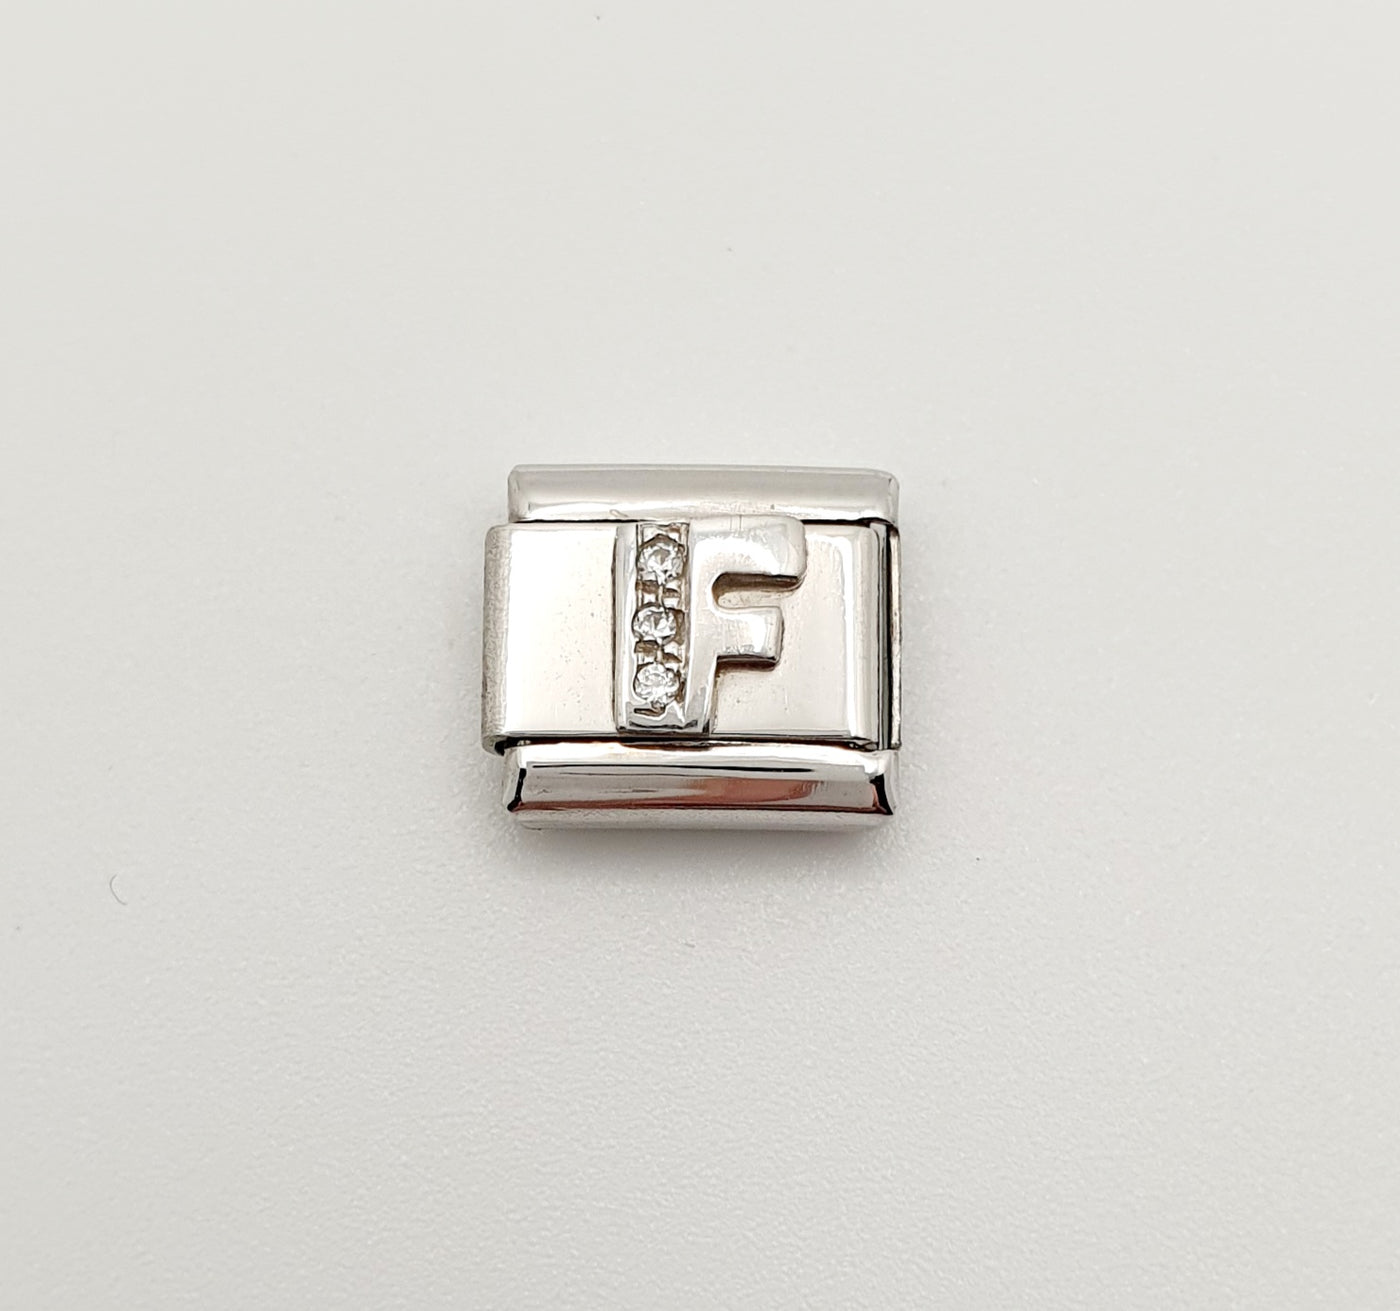 Nomination Charm Link "F" Stainless Steel with CZ's & 925 Silver, 330301 06